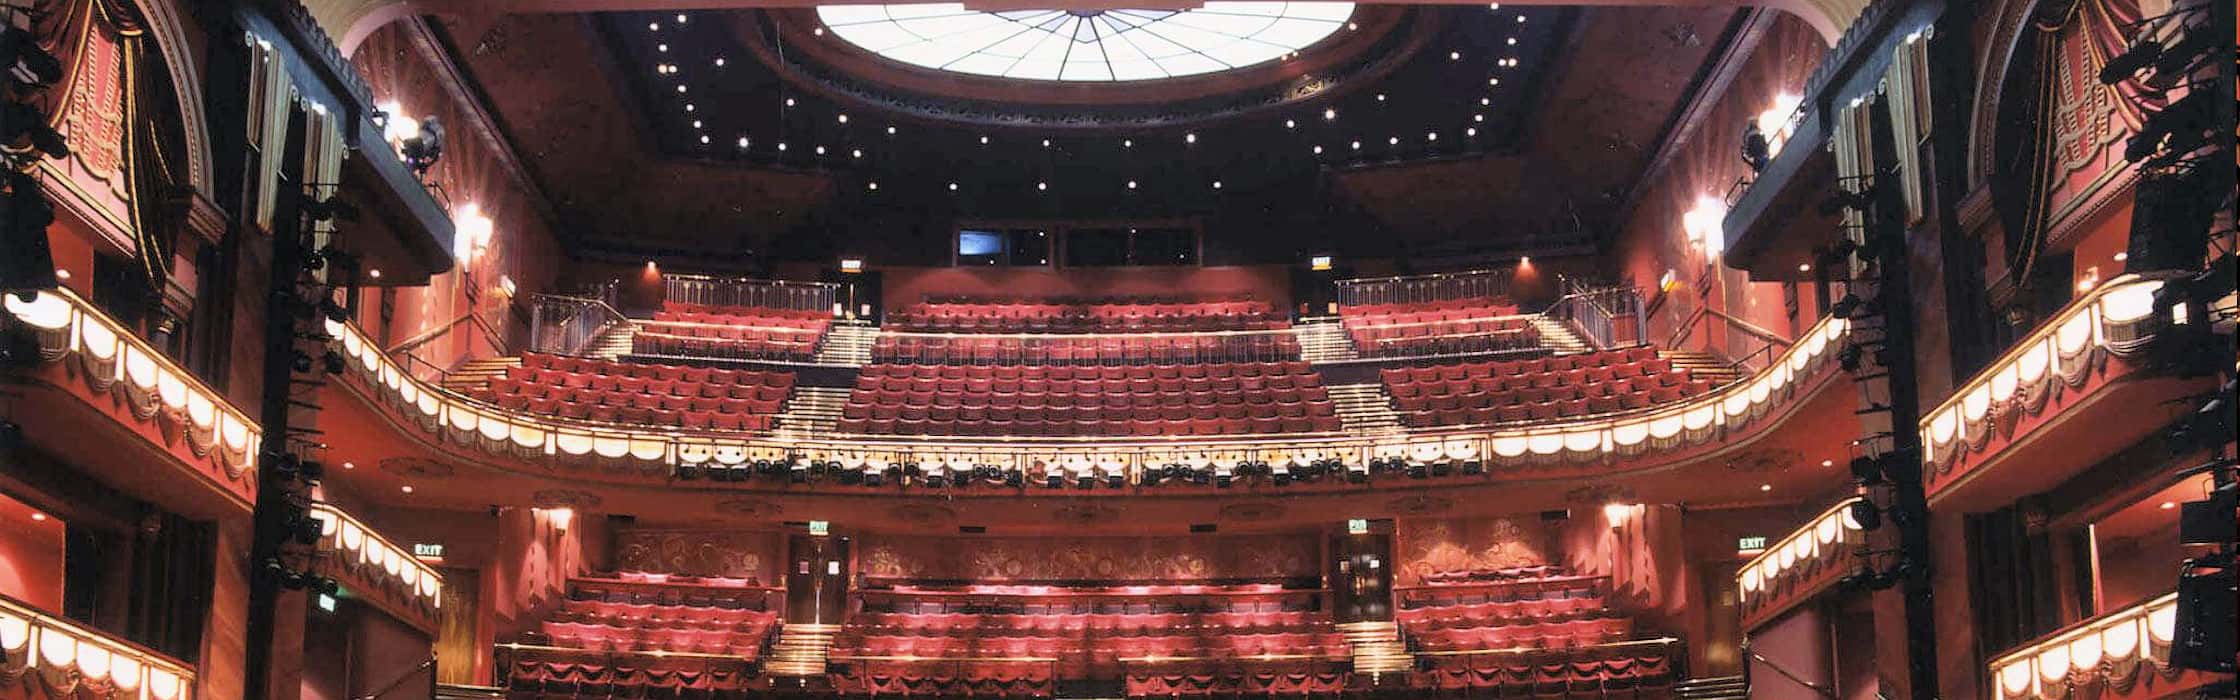 What's On at The Prince Edward Theatre, London